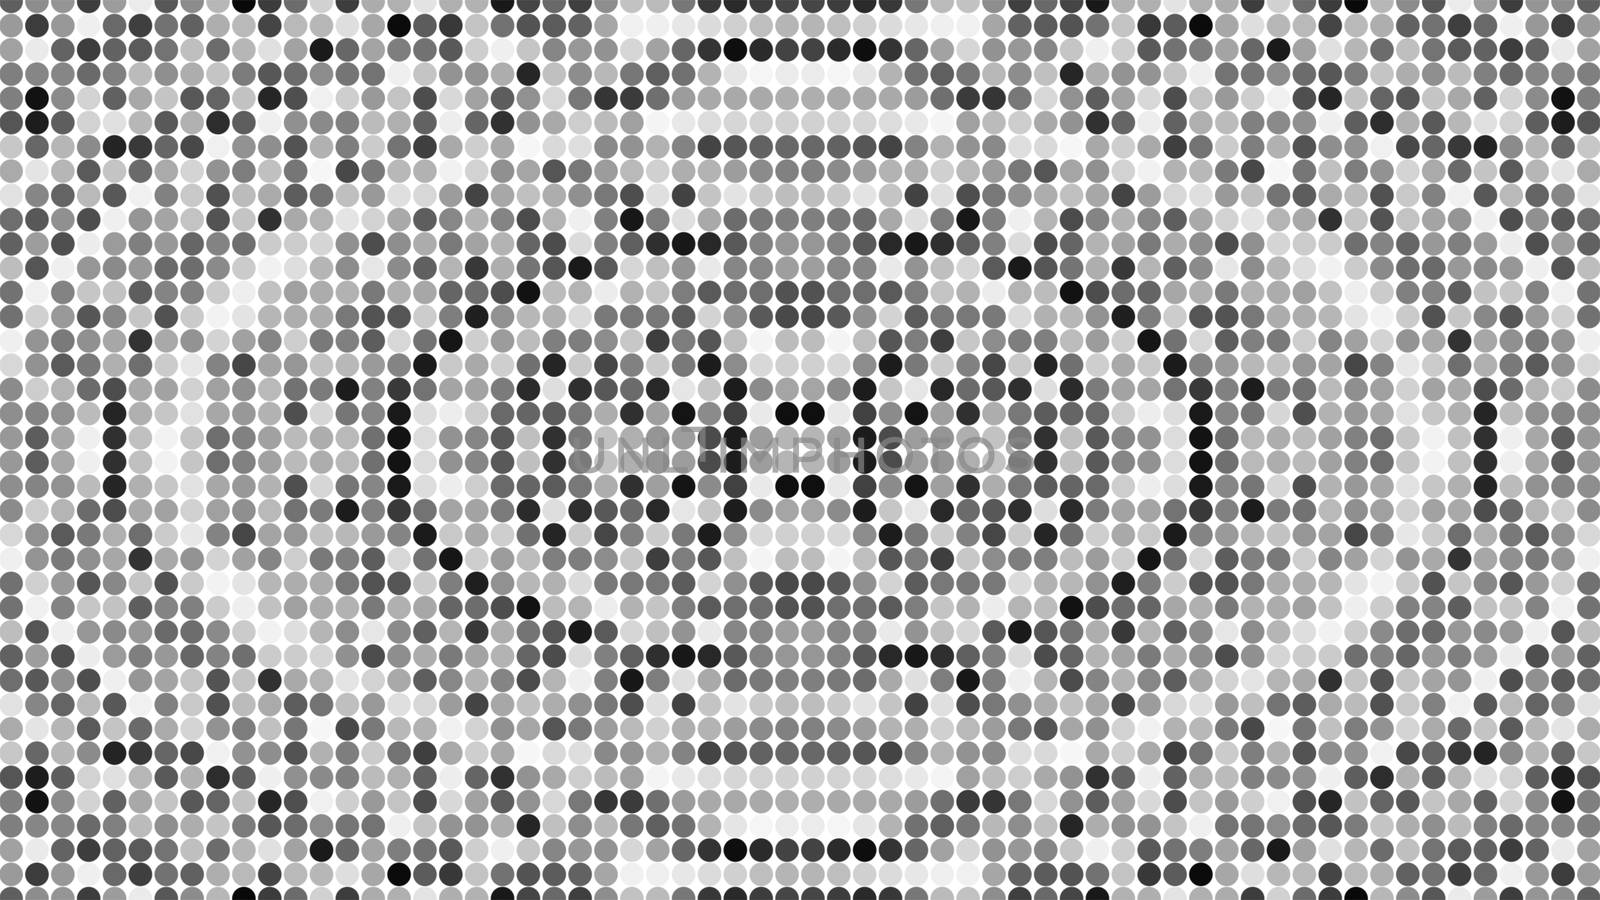 Abstract halftone dotted background. Monochrome pattern with dot and circles by nolimit046